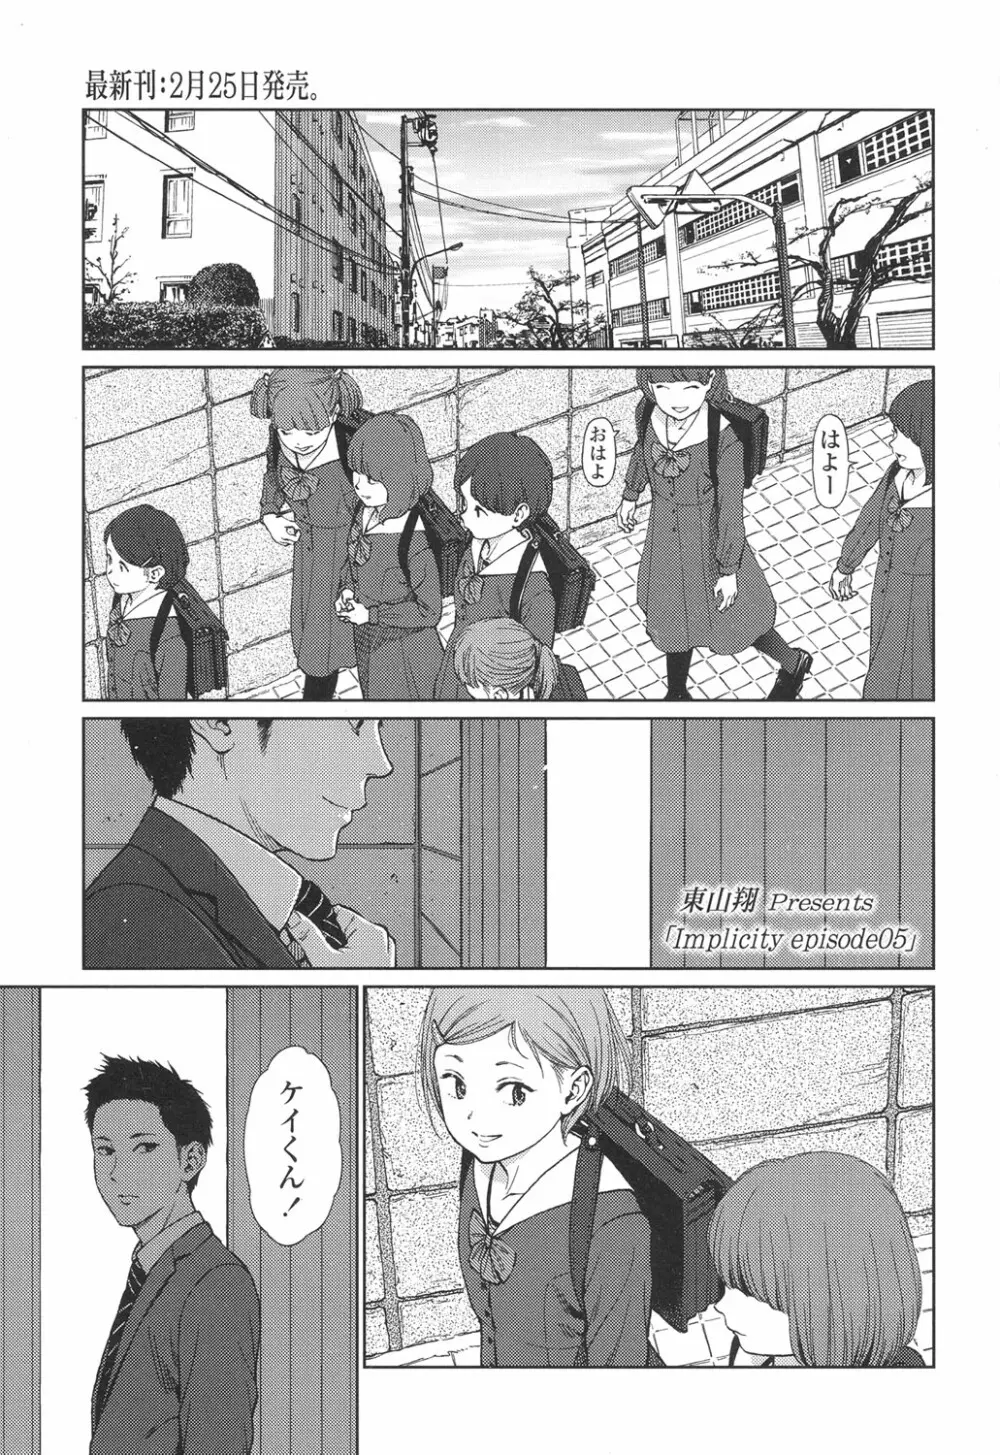 Implicity 5-11話 Page.1